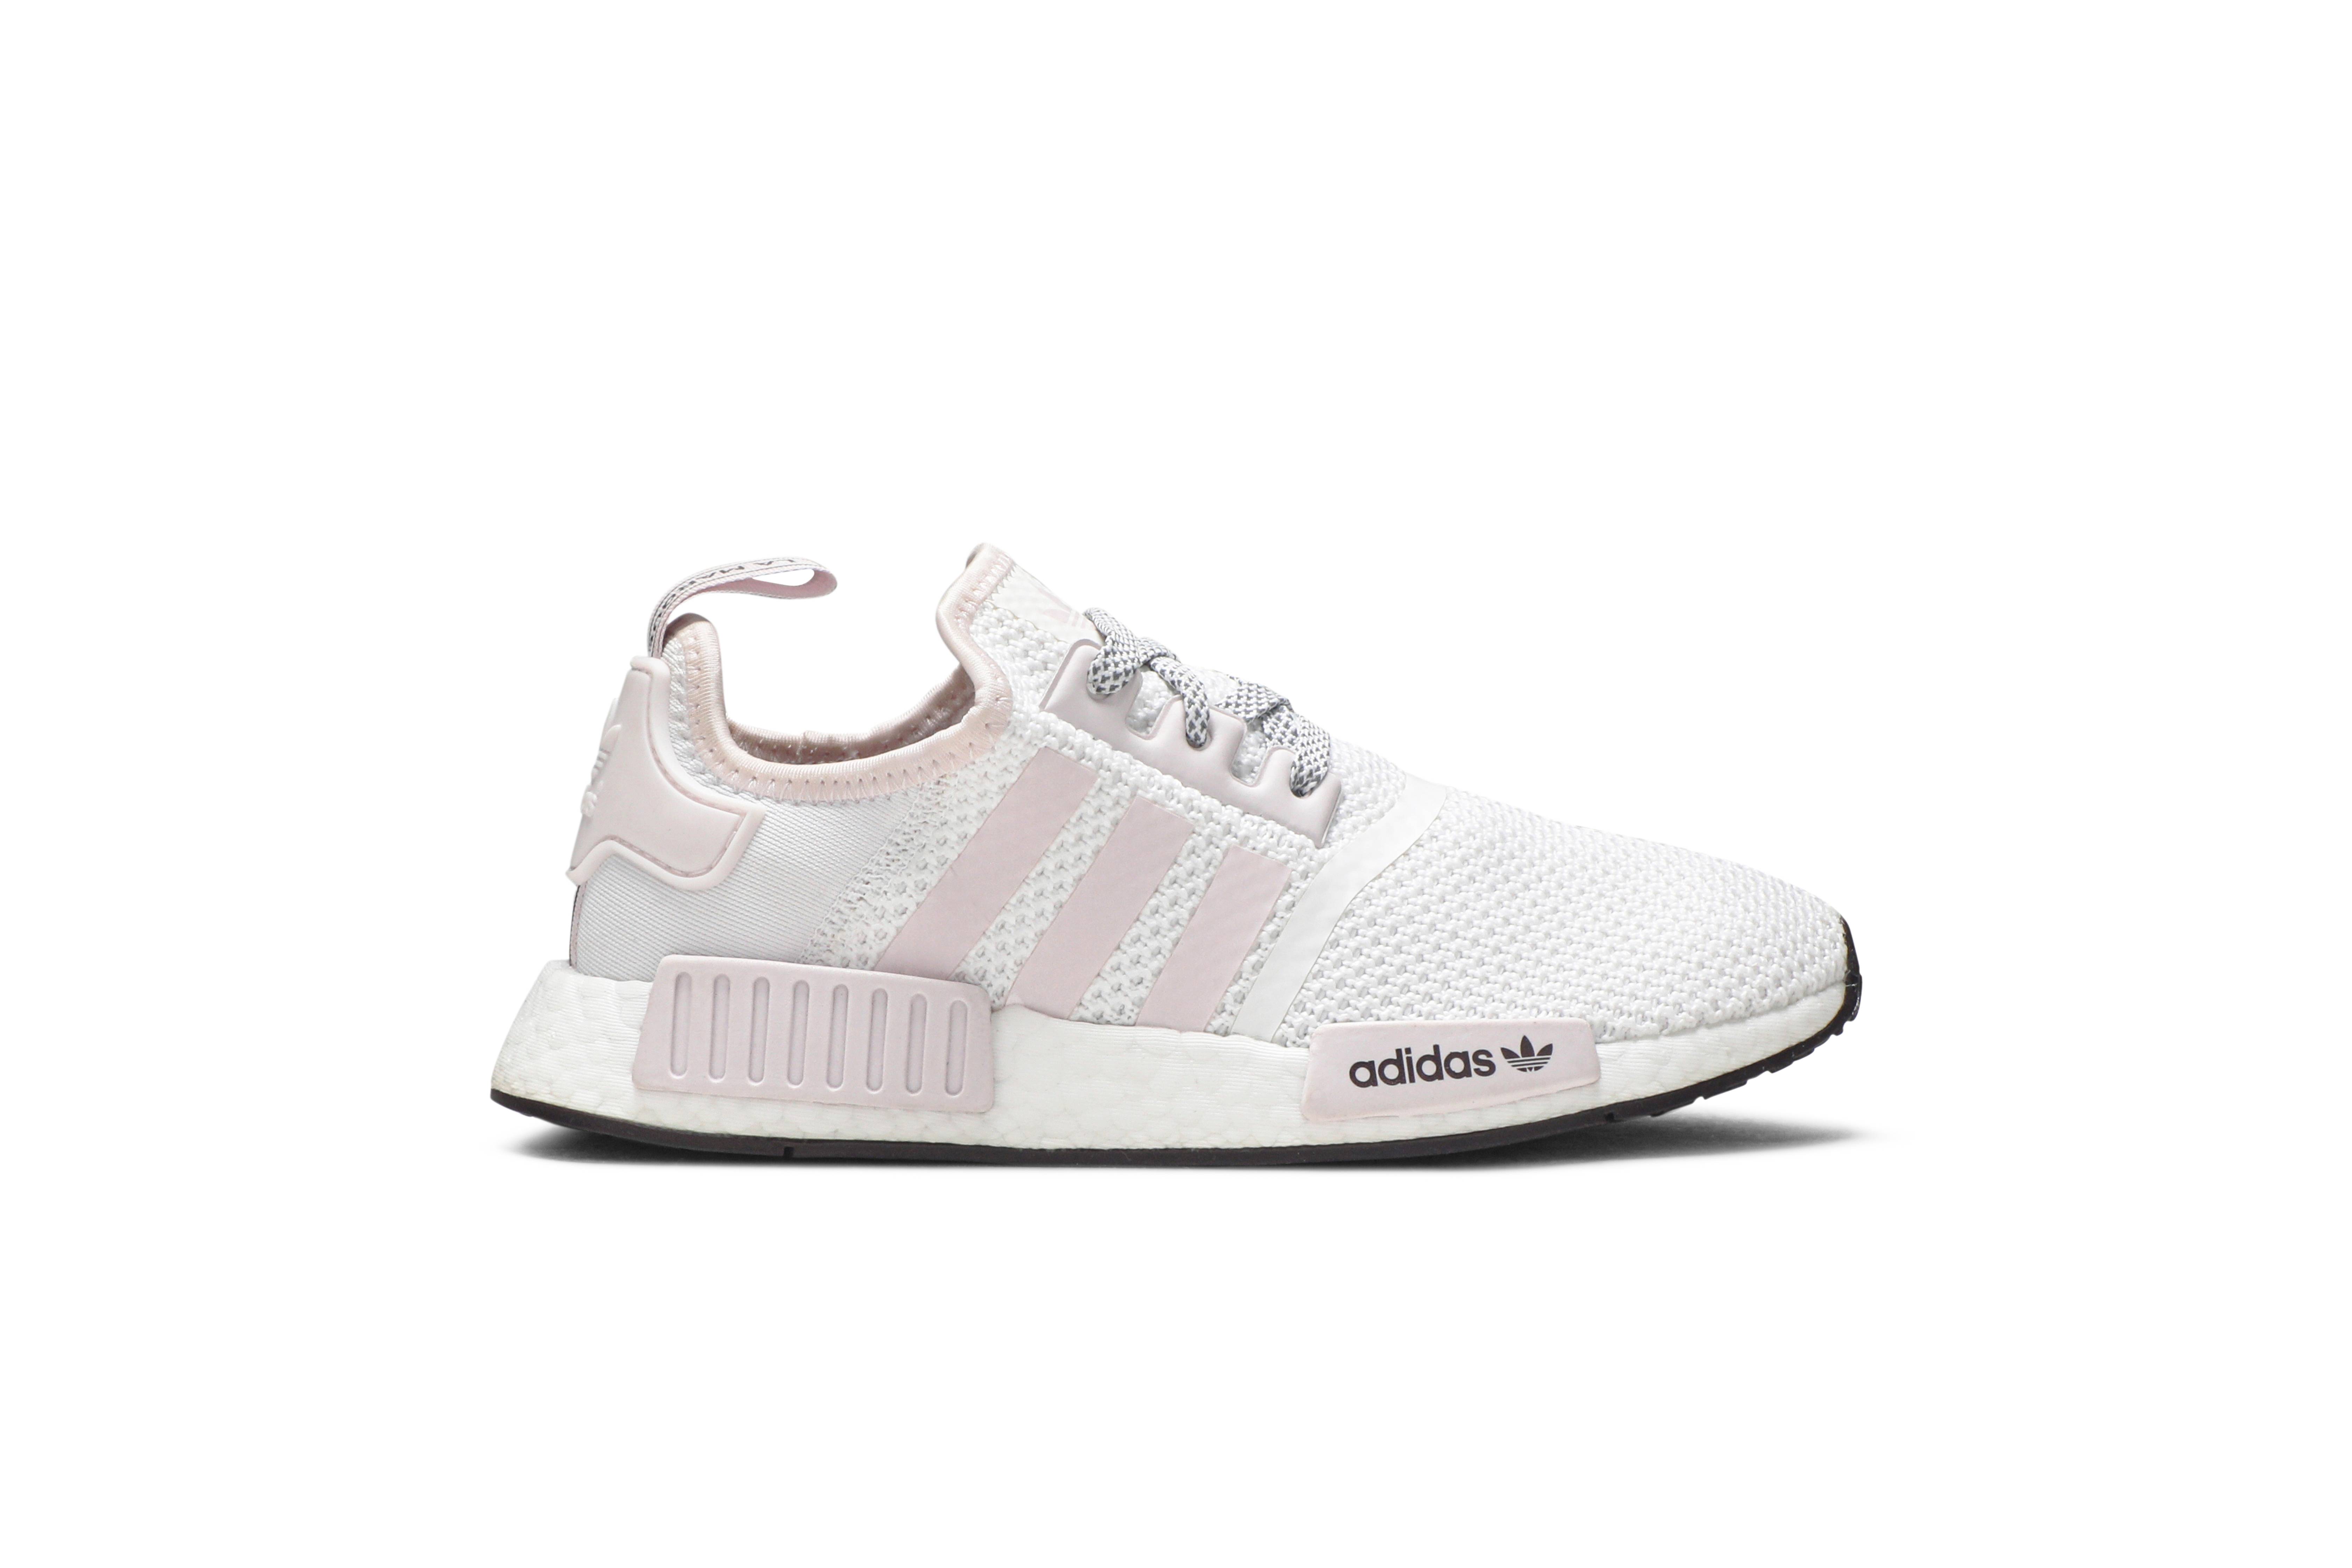 orchid tint nmds